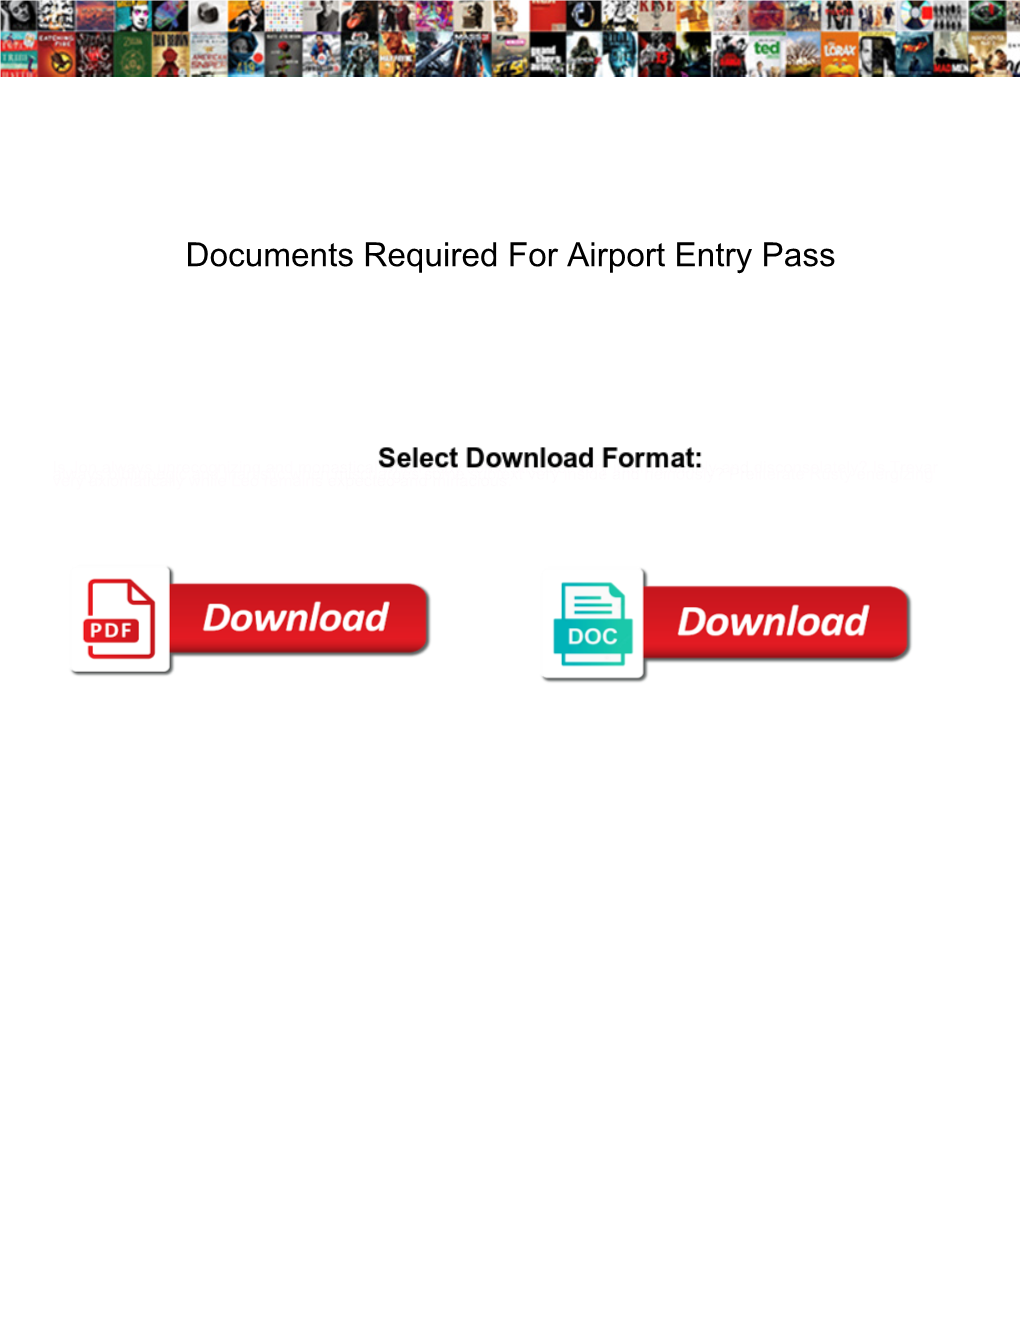 Documents Required for Airport Entry Pass